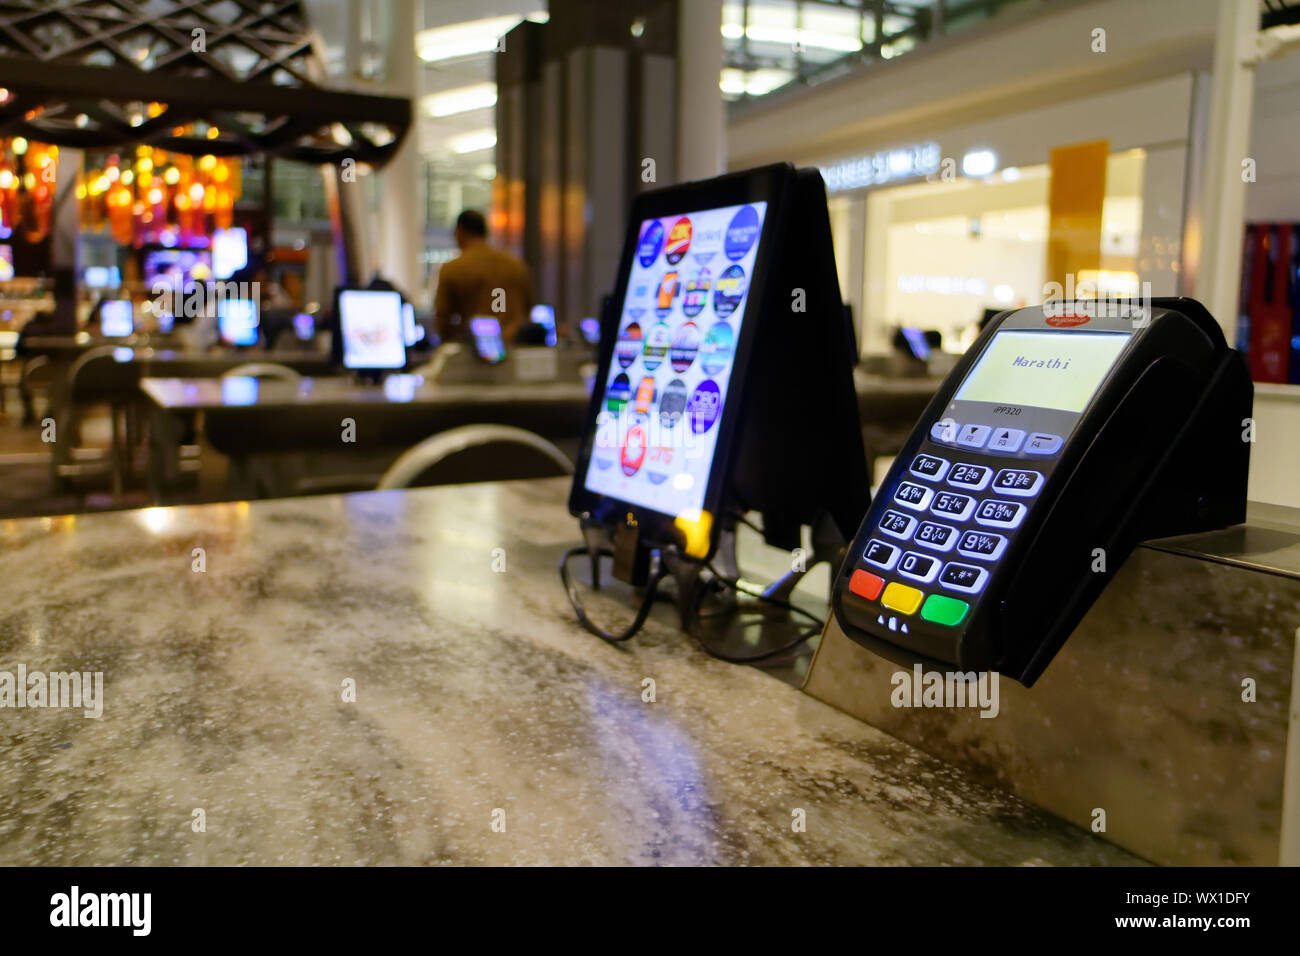 Tablets for ordering and paying for food in the departure lounge at Toronto Pearson airport Stock Photo